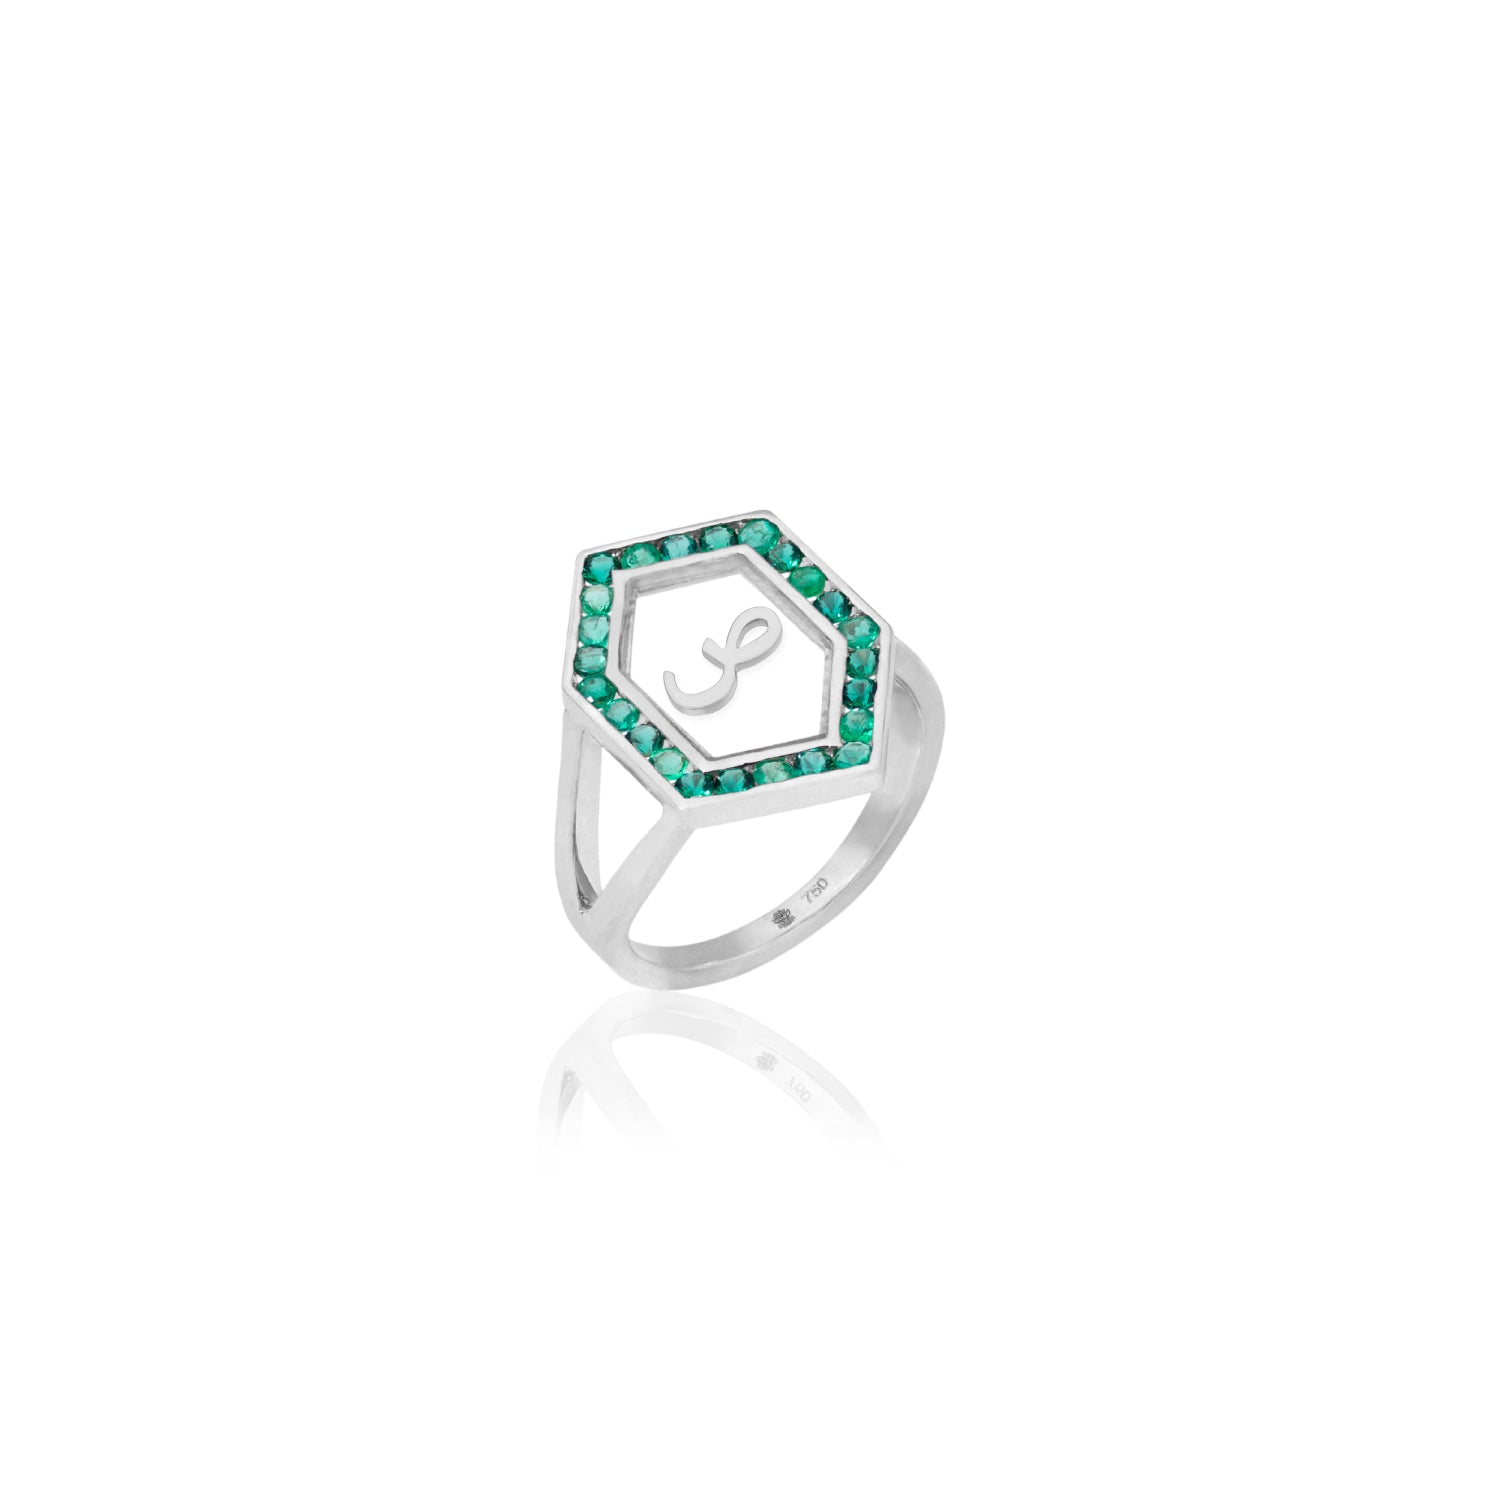 Qamoos 1.0 Letter ص Emerald Ring in White Gold